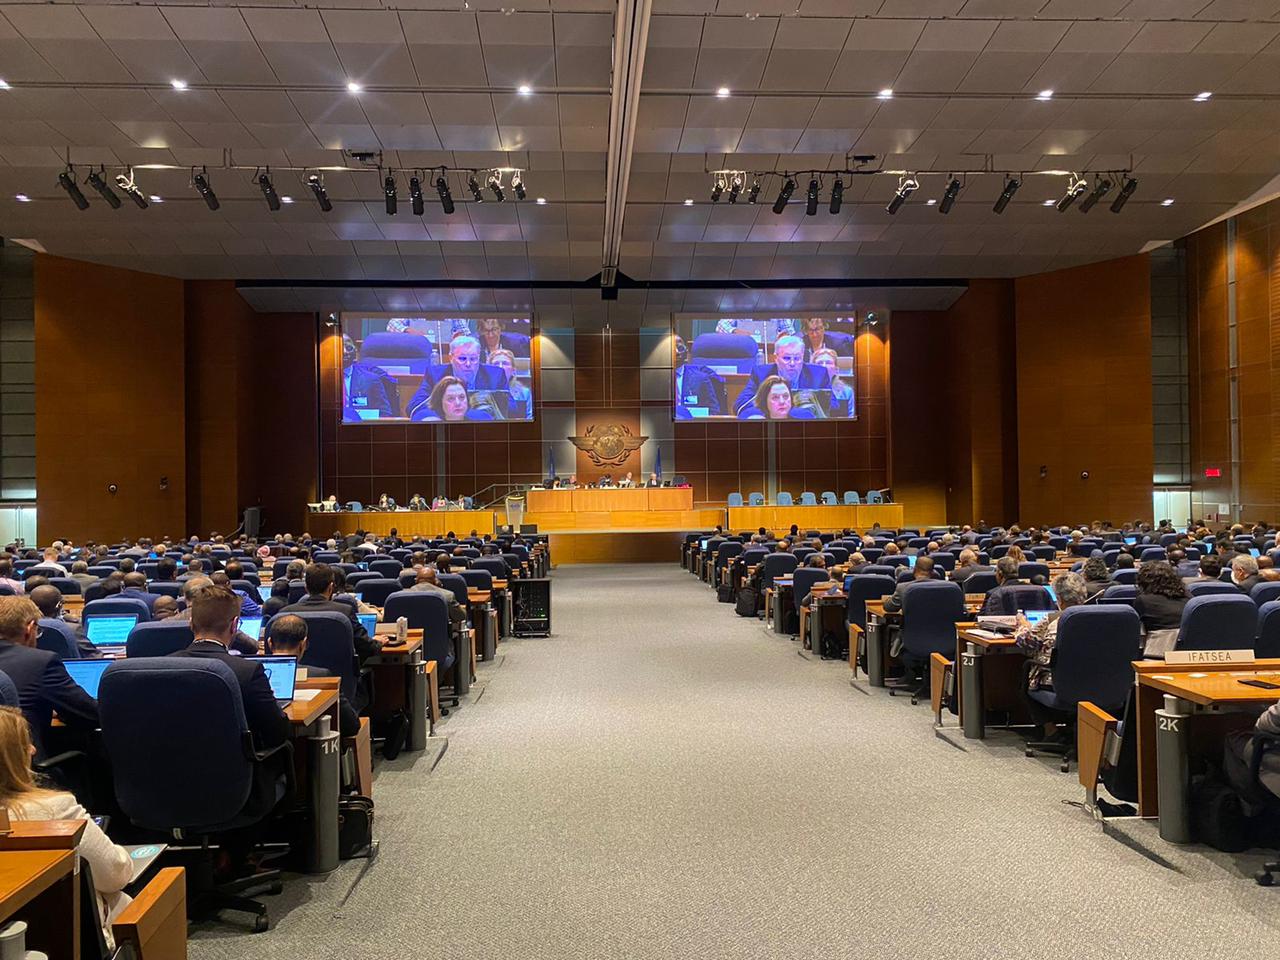 Brazil is reelected to the ICAO Council with 93% of the votes